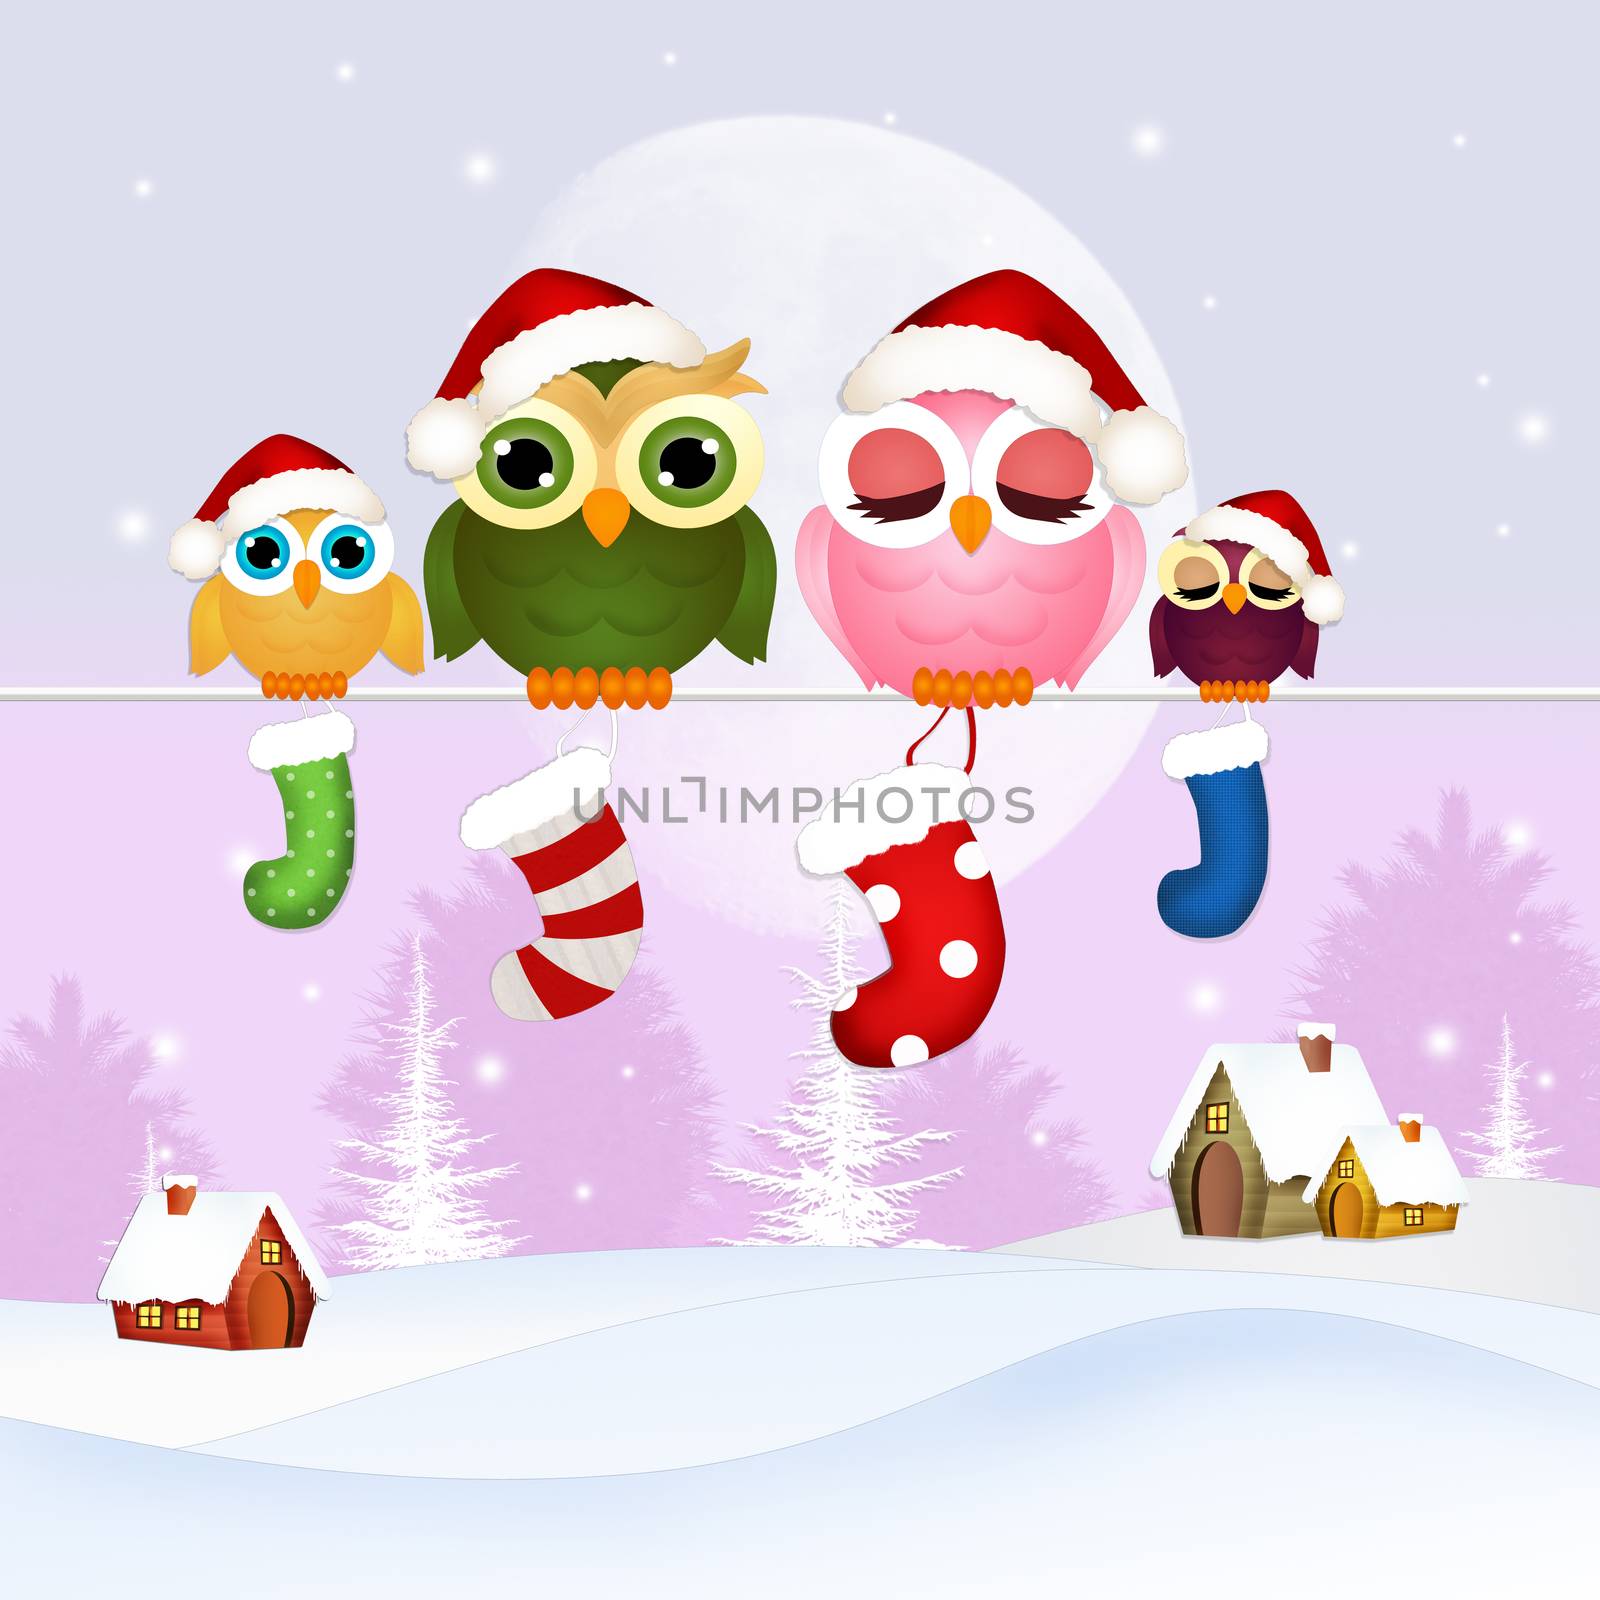 illustration of owls family with Christmas socks